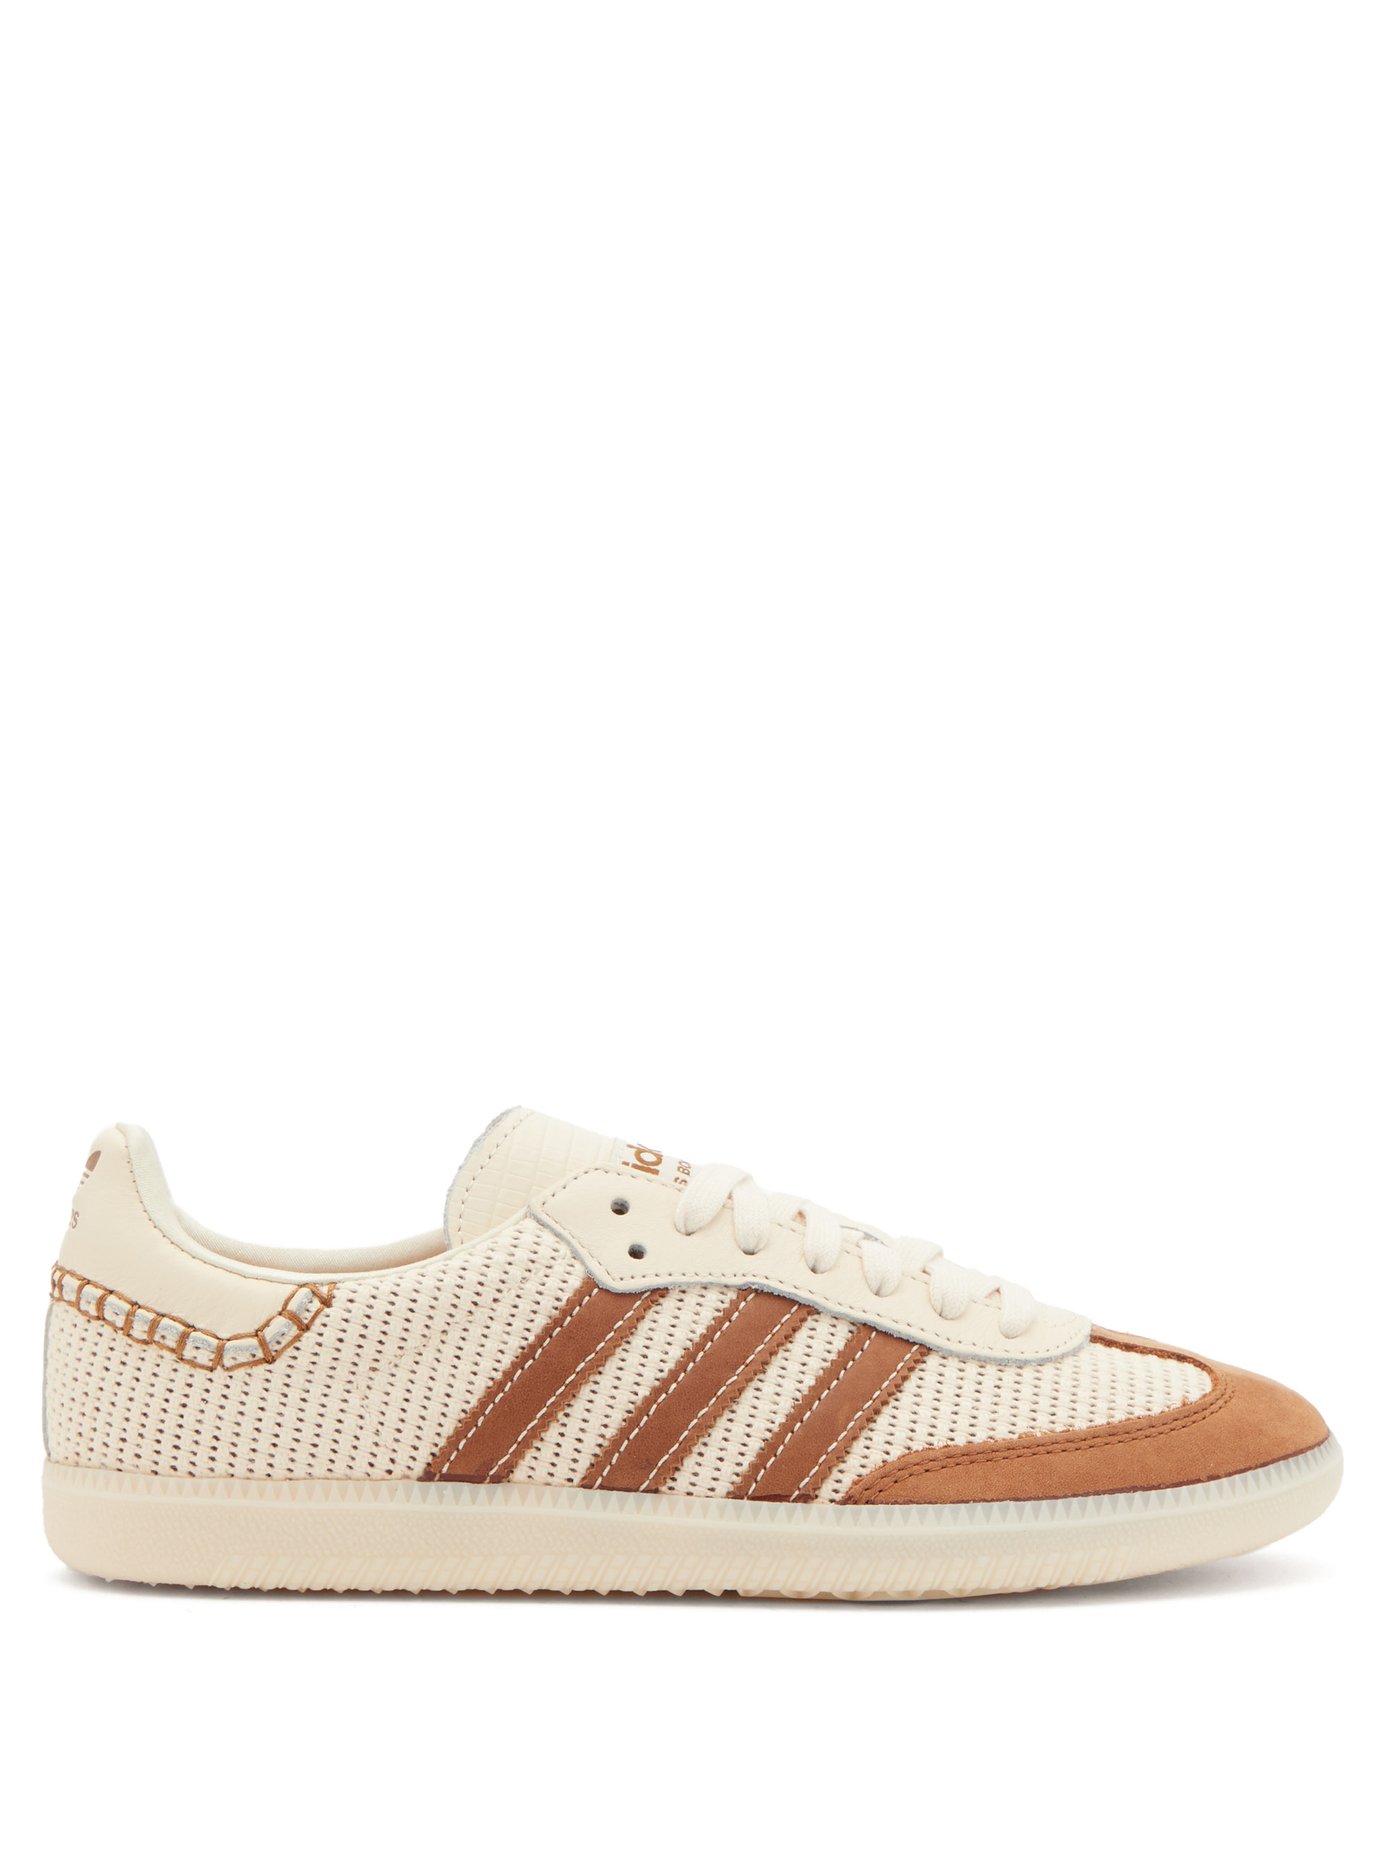 SL72 woven cotton and leather trainers 